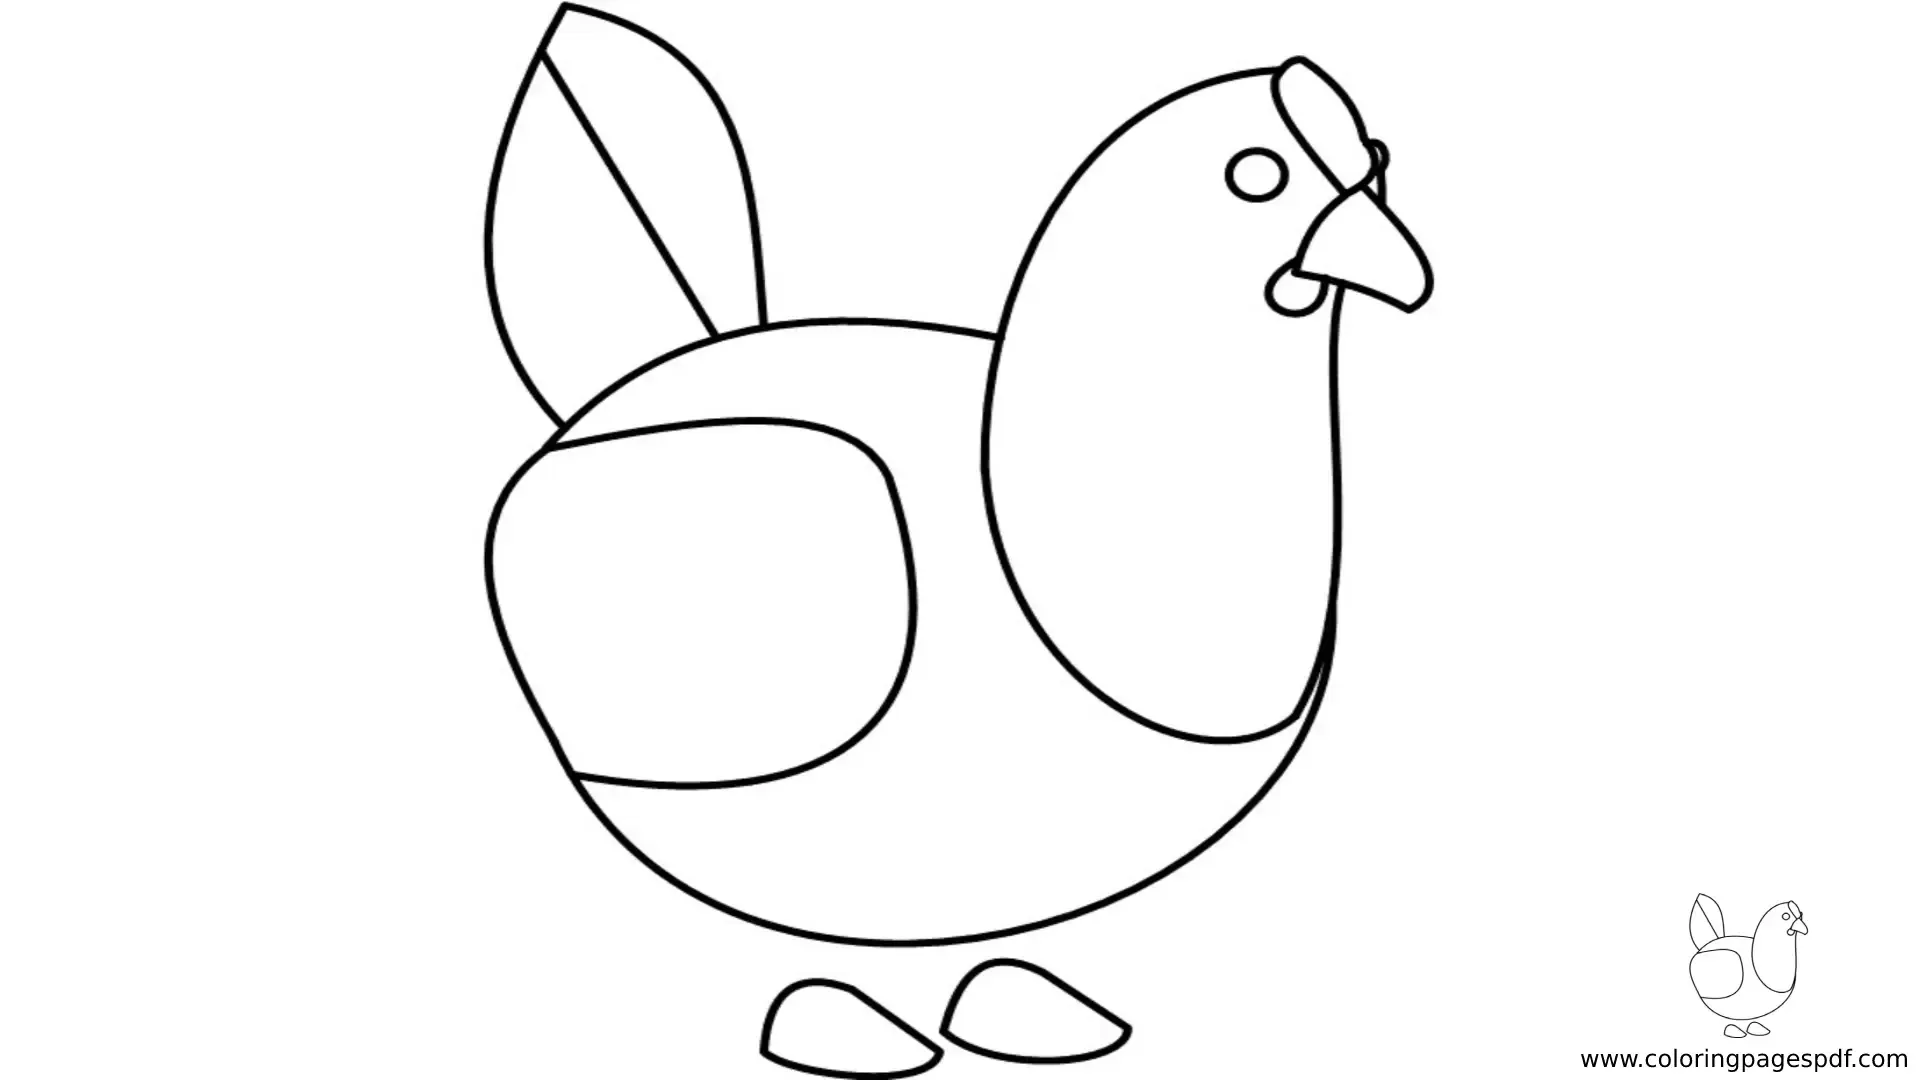 Adopt Me Chicken Coloring Pages